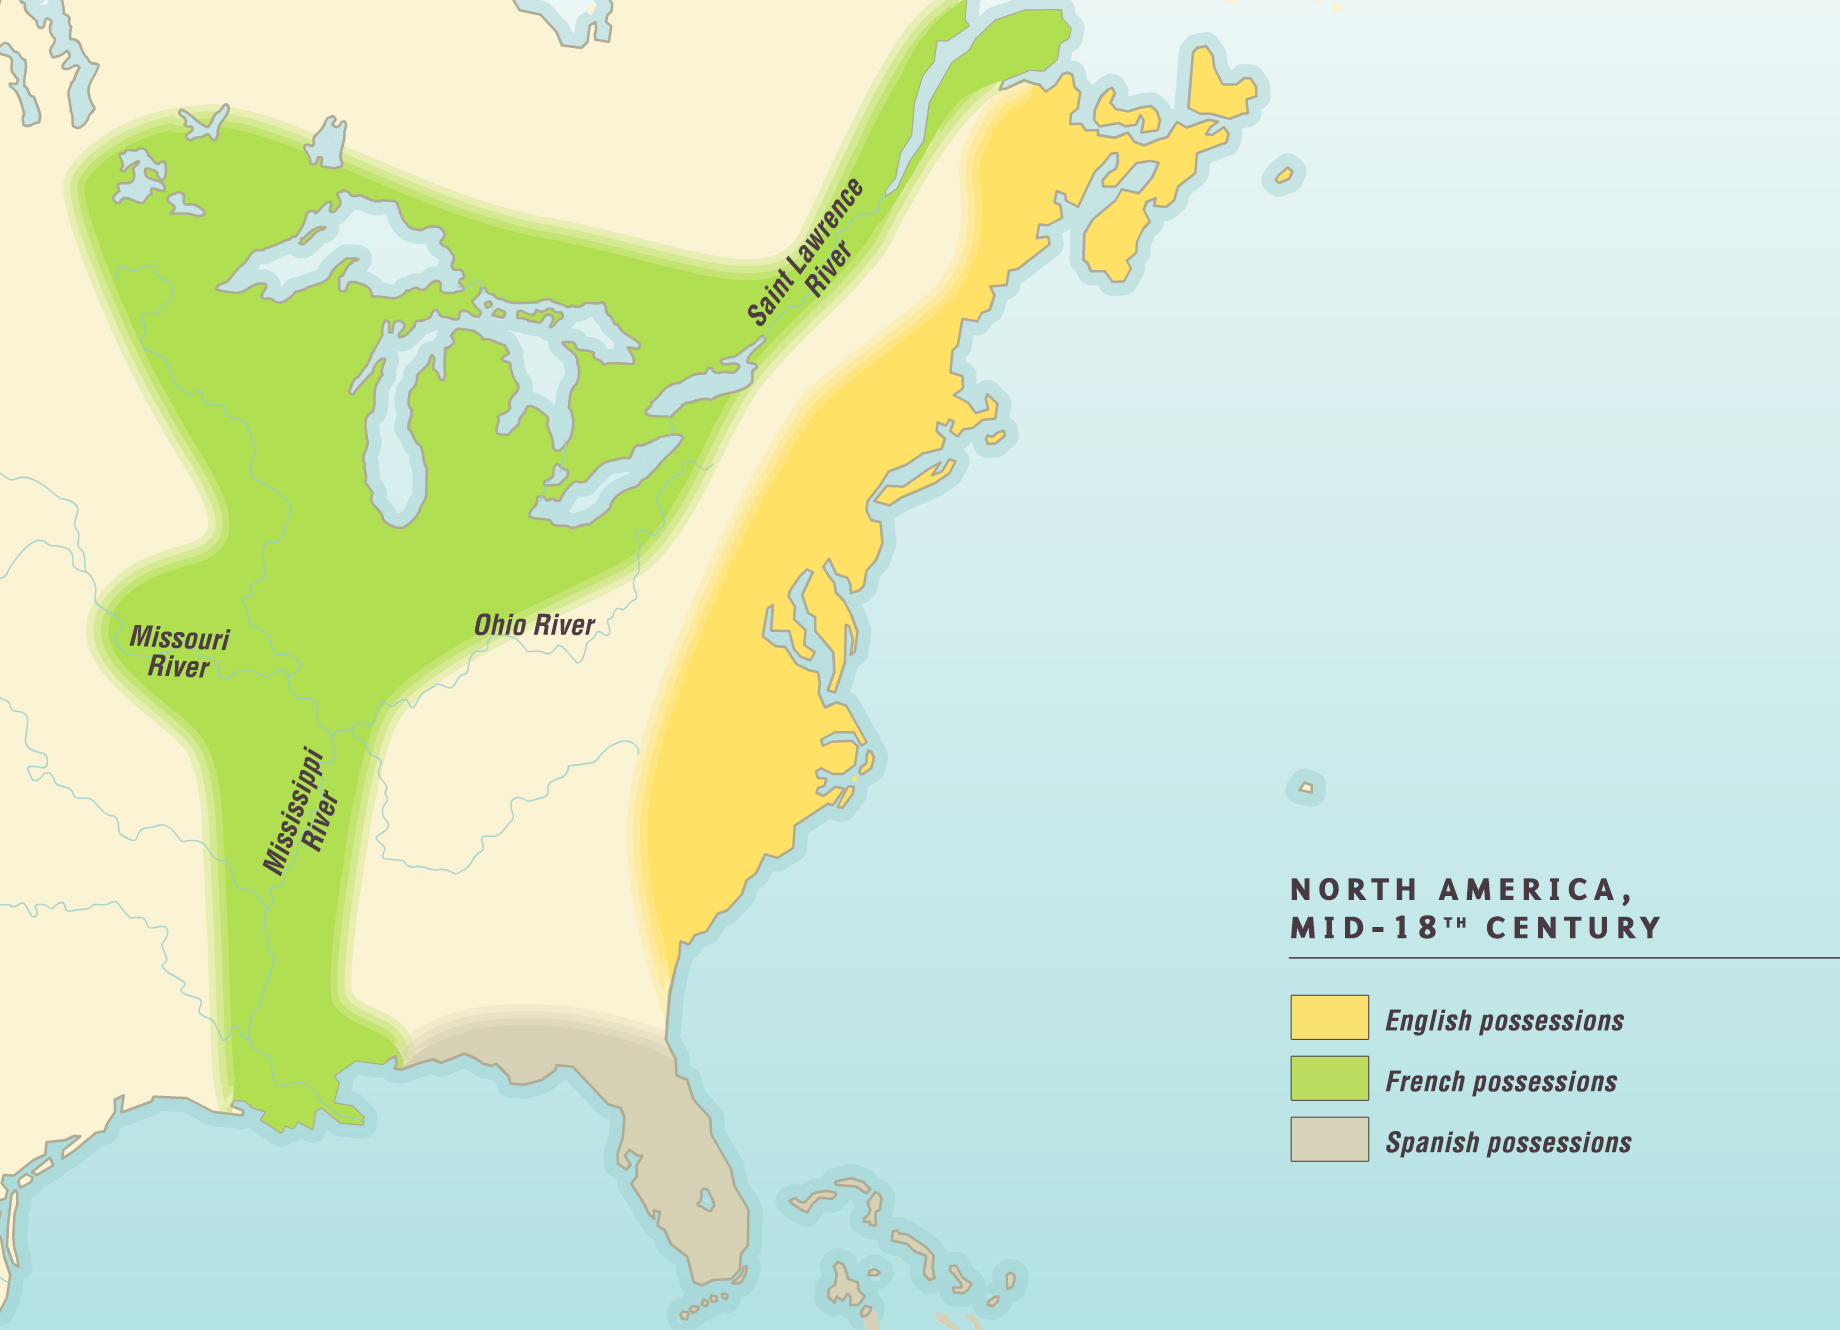 Map of part of North America in the mid-18th century showing English, French, and Spanish possessions (courtesy The Map as History)